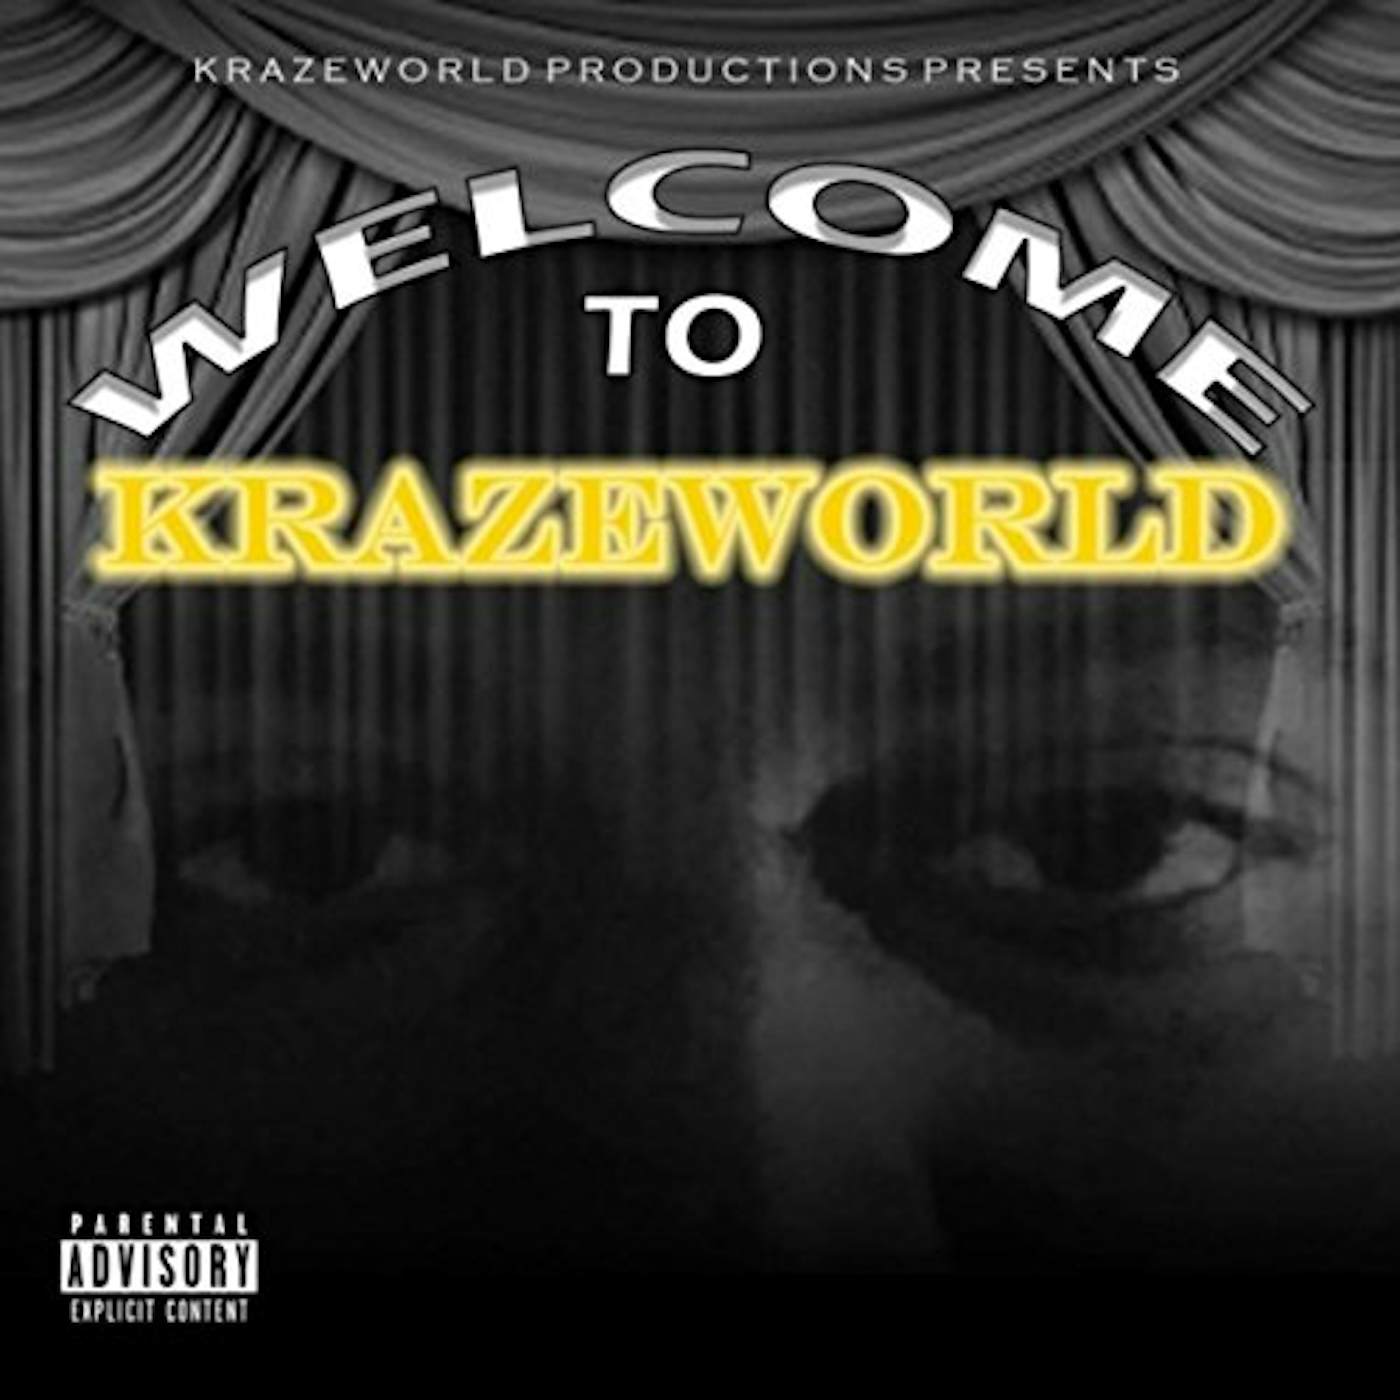 WELCOME TO KRAZEWORLD CD